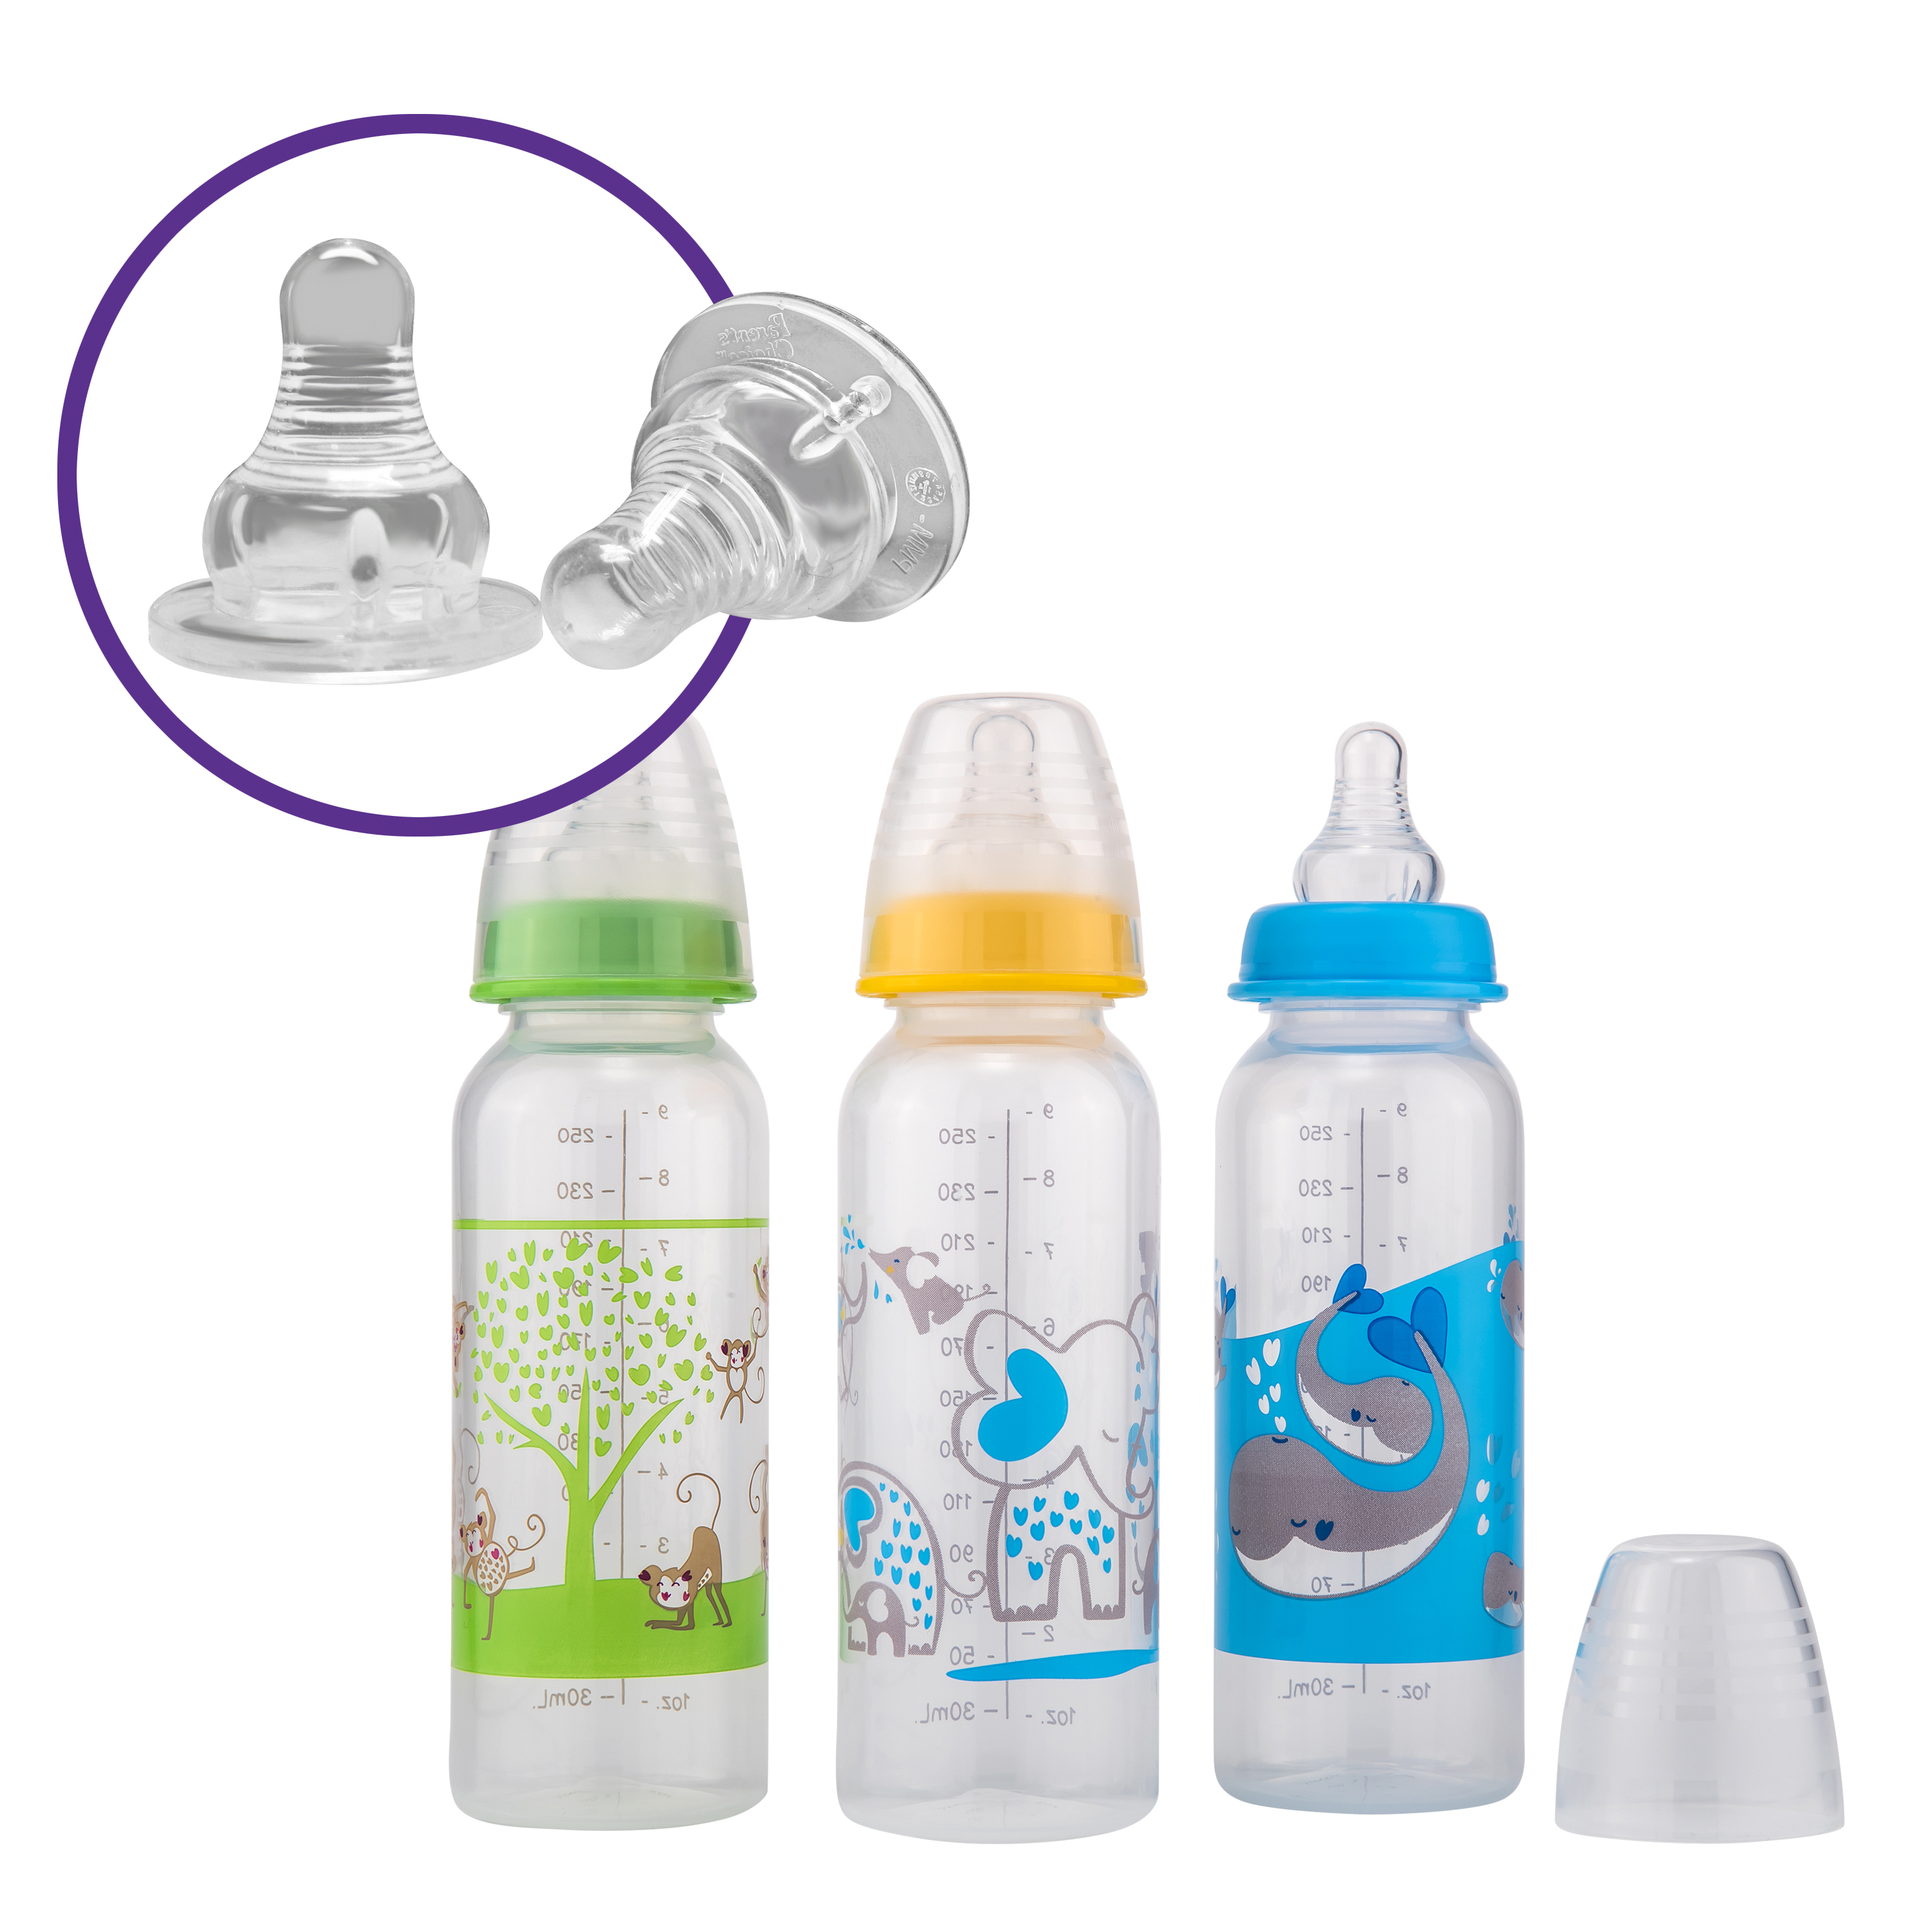 Parent's Choice Baby Bottles, 9 fl oz, 3 count, Colors May Vary - image 3 of 6